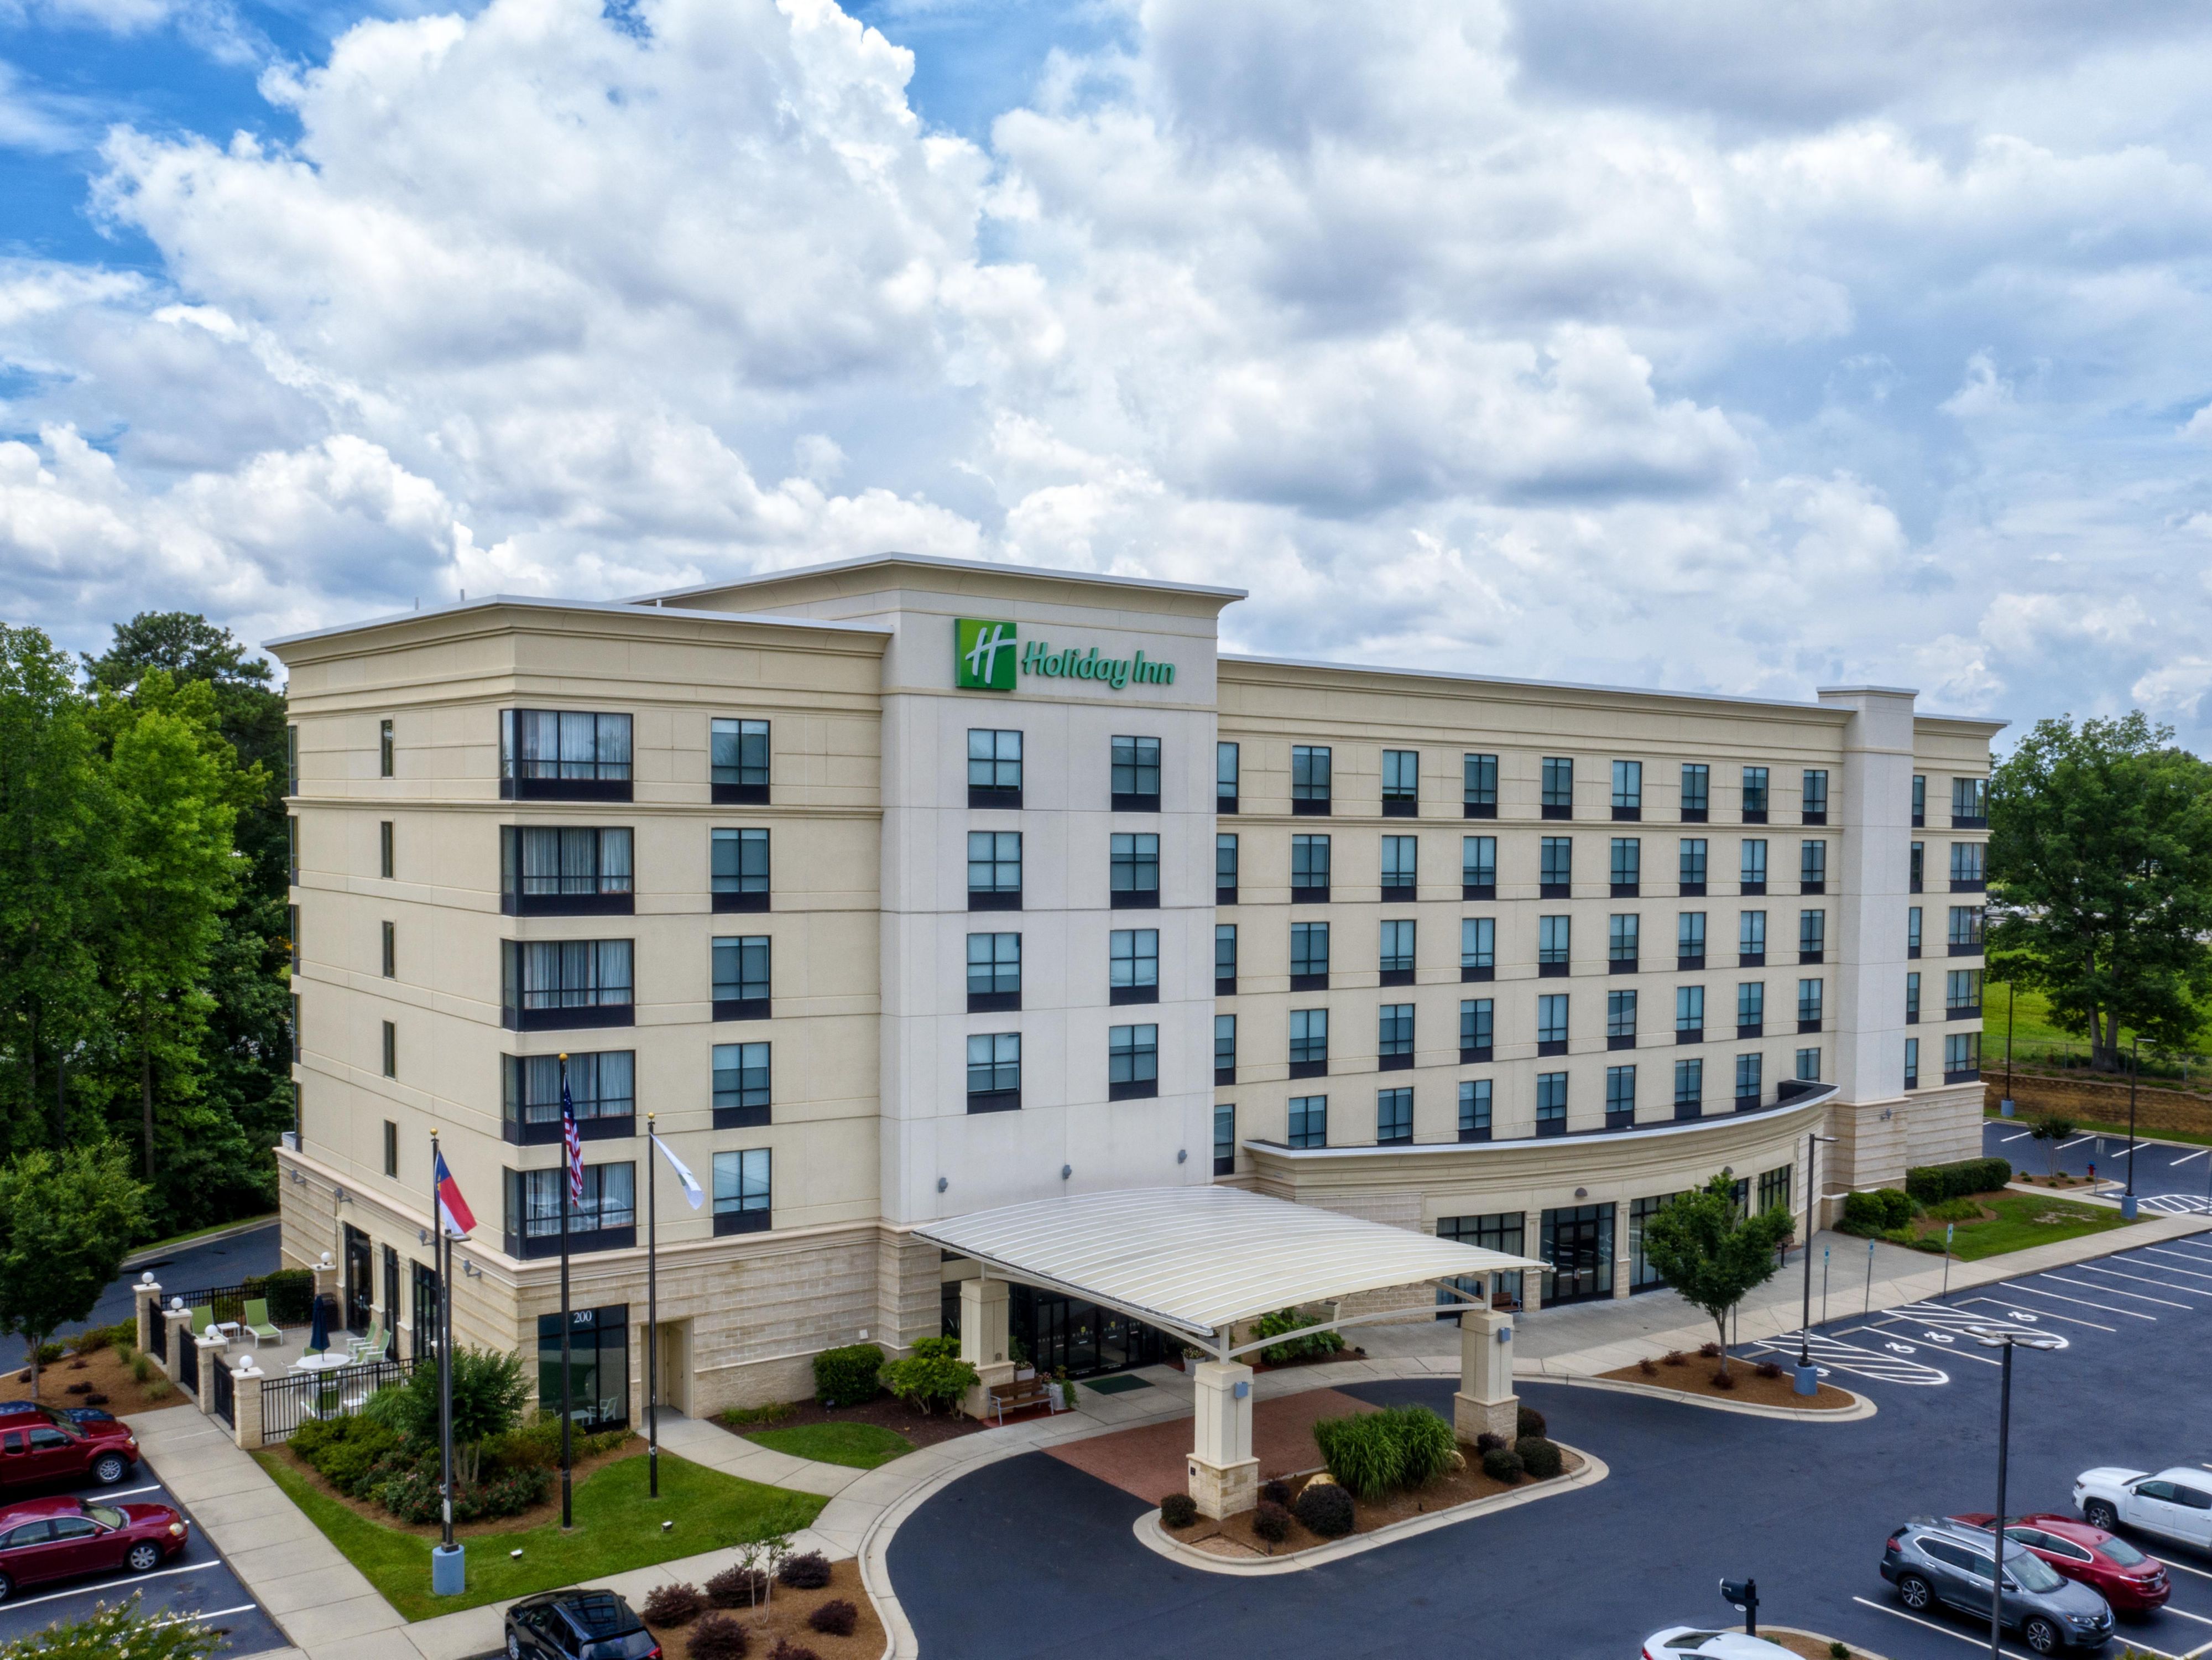 All guests get free parking at the Holiday Inn Rocky Mount. Whether it is your family’s car, RV, boat or you’re driving through with an 18-wheeler, this is the hotel for you. Call now to book!